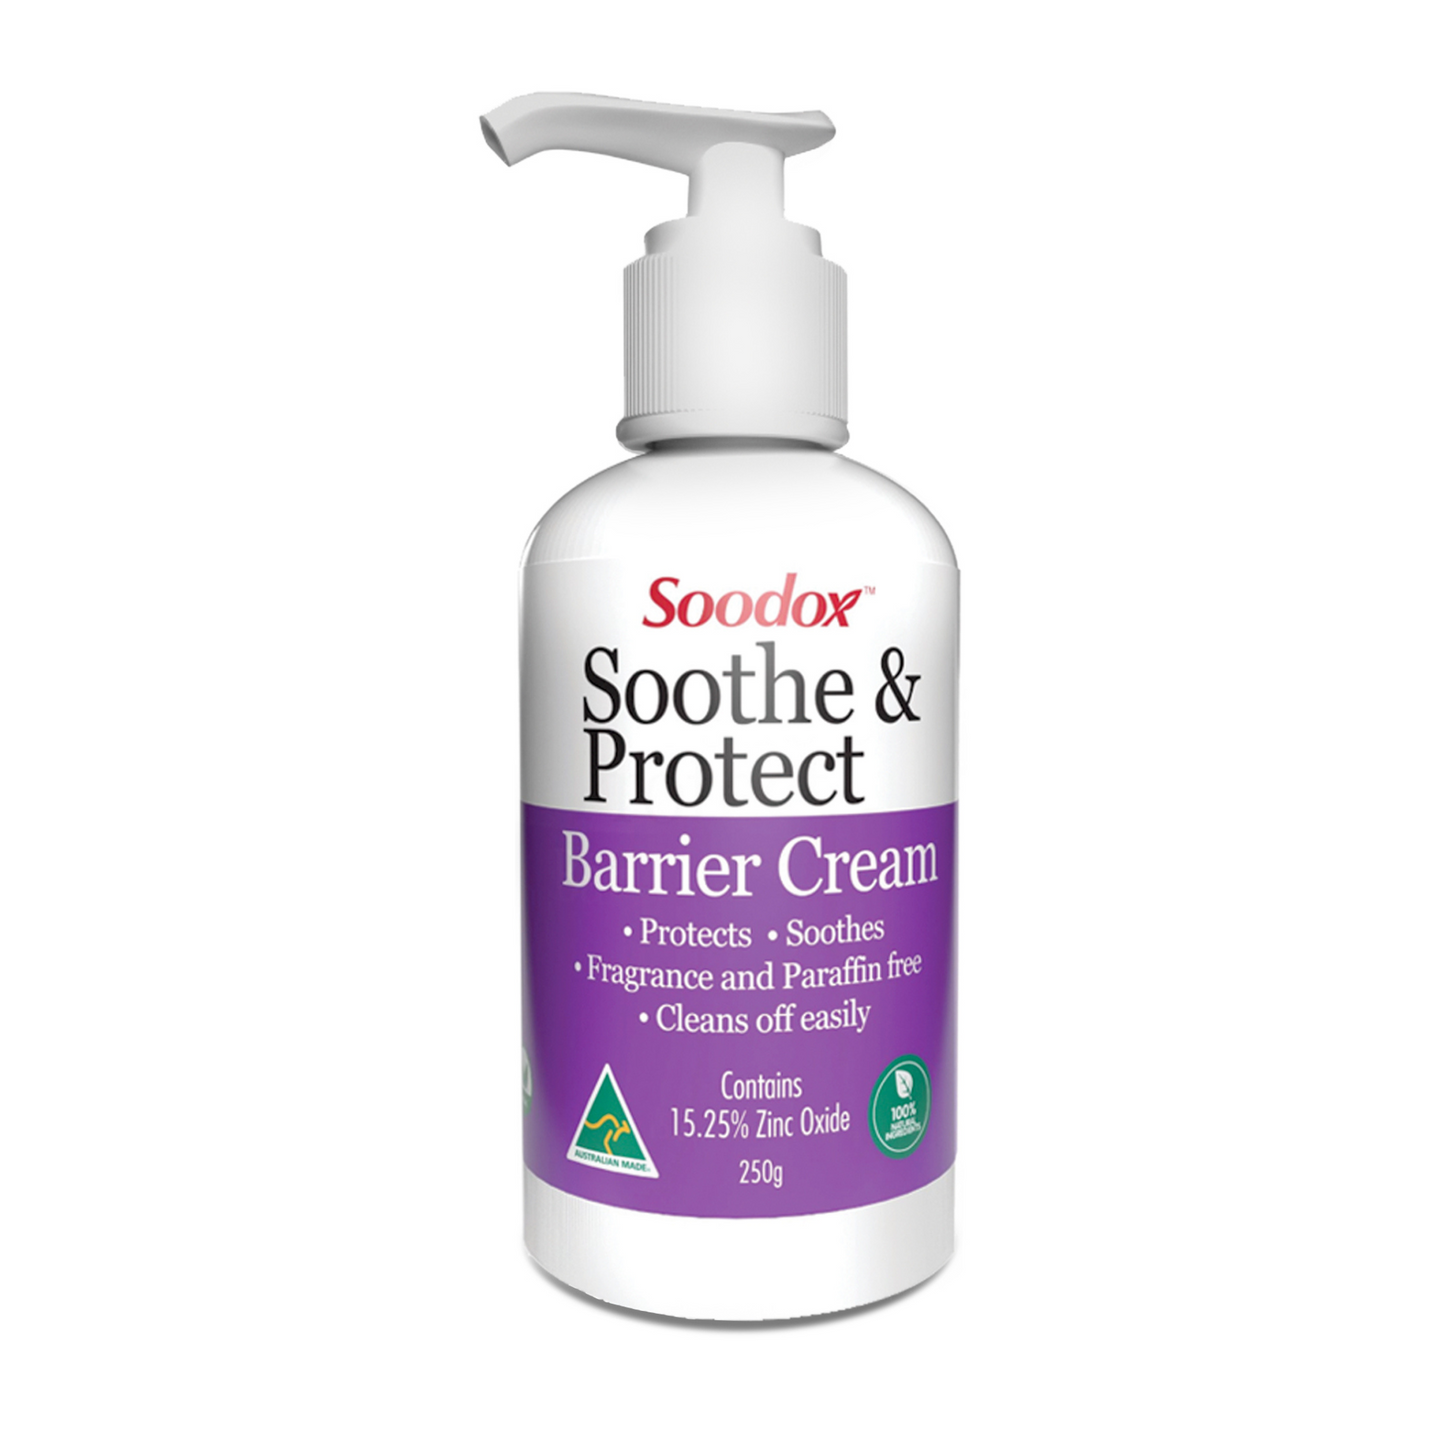 Soodox Soothe & Protect Barrier Cream 250g Pump (1pc)